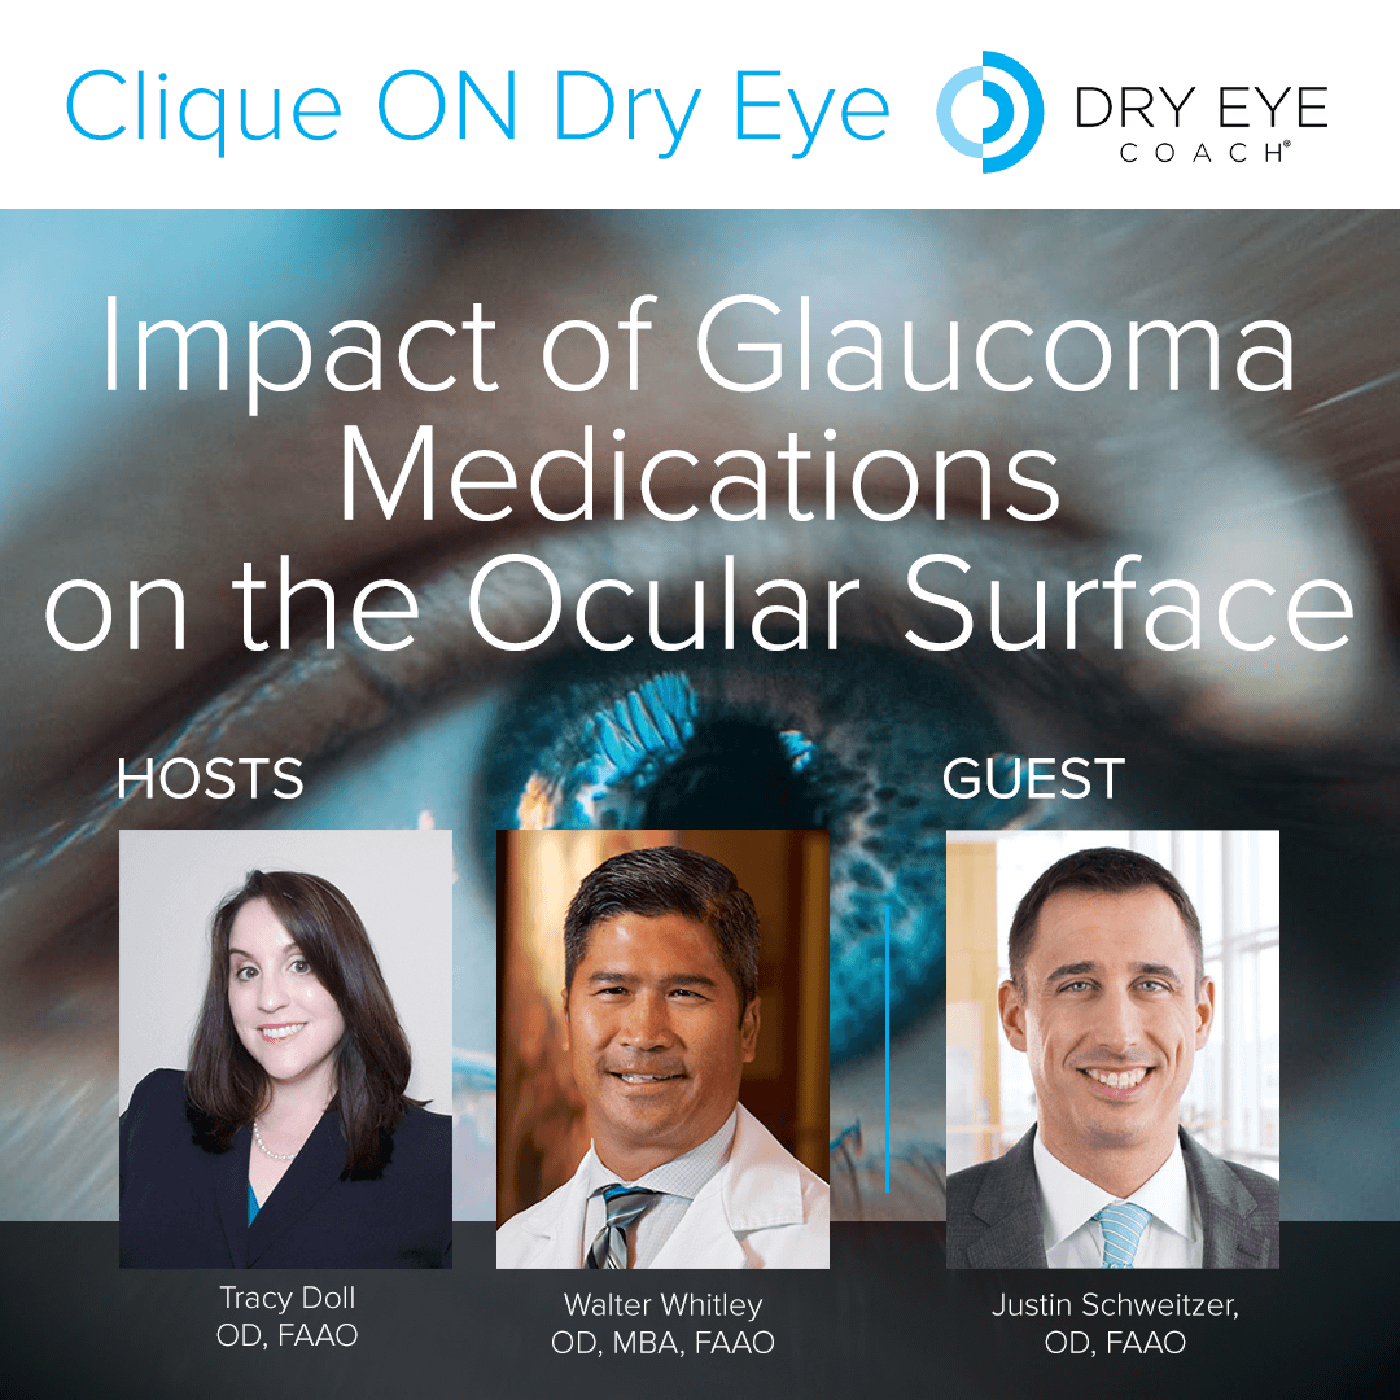 Impact of Glaucoma Medications on the Ocular Surface